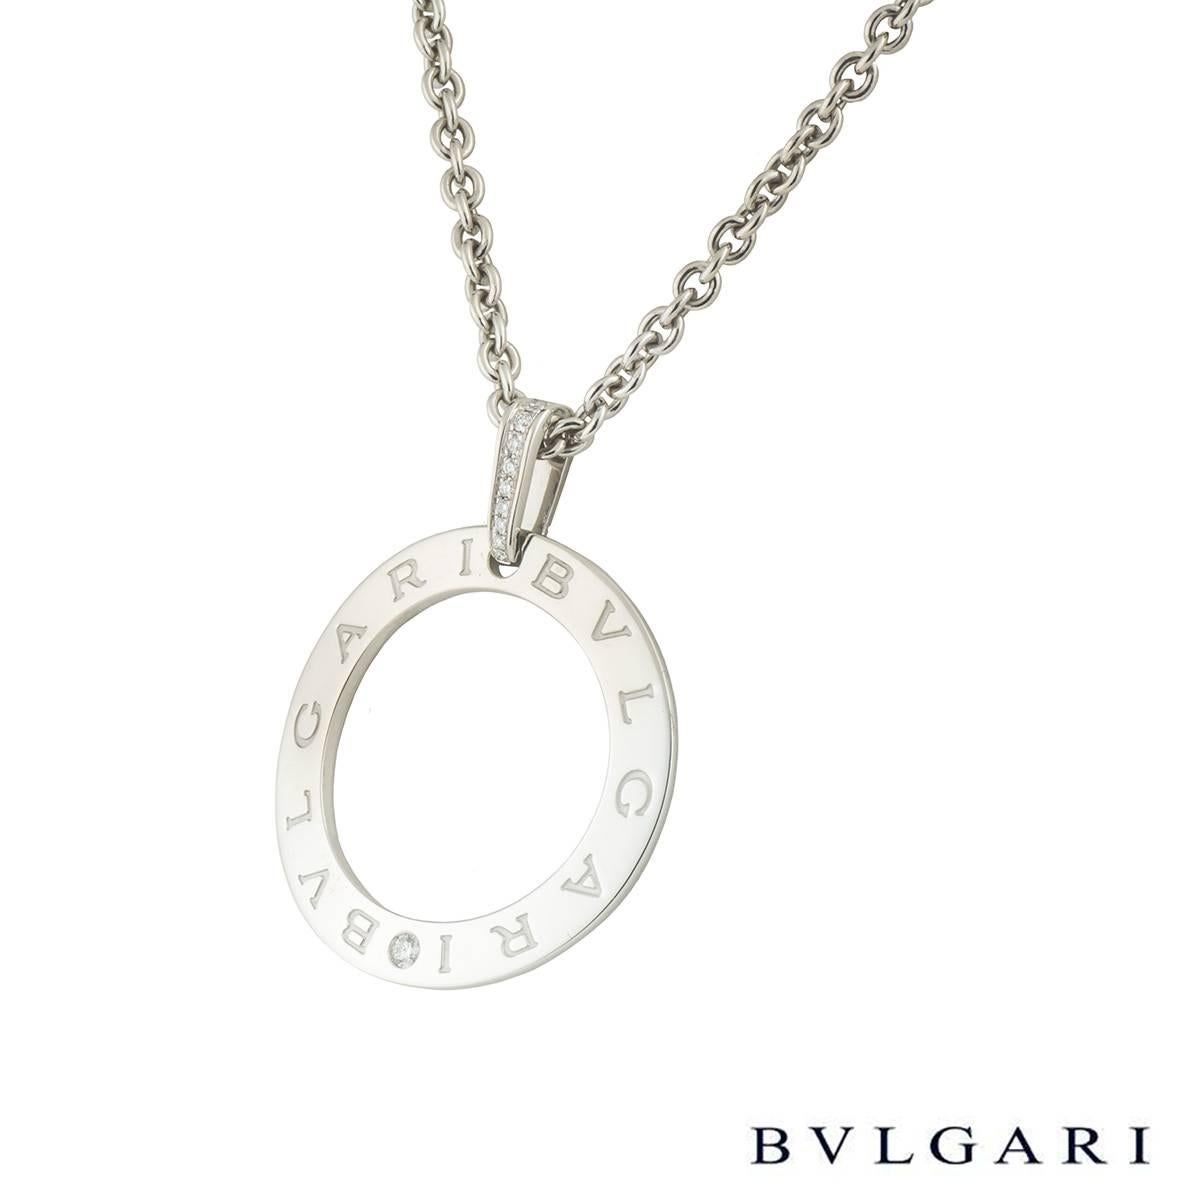 A lovely 18k white gold Bvlgari necklace from the Bvlgari Bvlgari collection. The necklace comprises of a circular openwork motif with 'Bvlgari Bvlgari' embossed around the outer edge. The necklace loop bail has 9 round brilliant cut diamonds in a